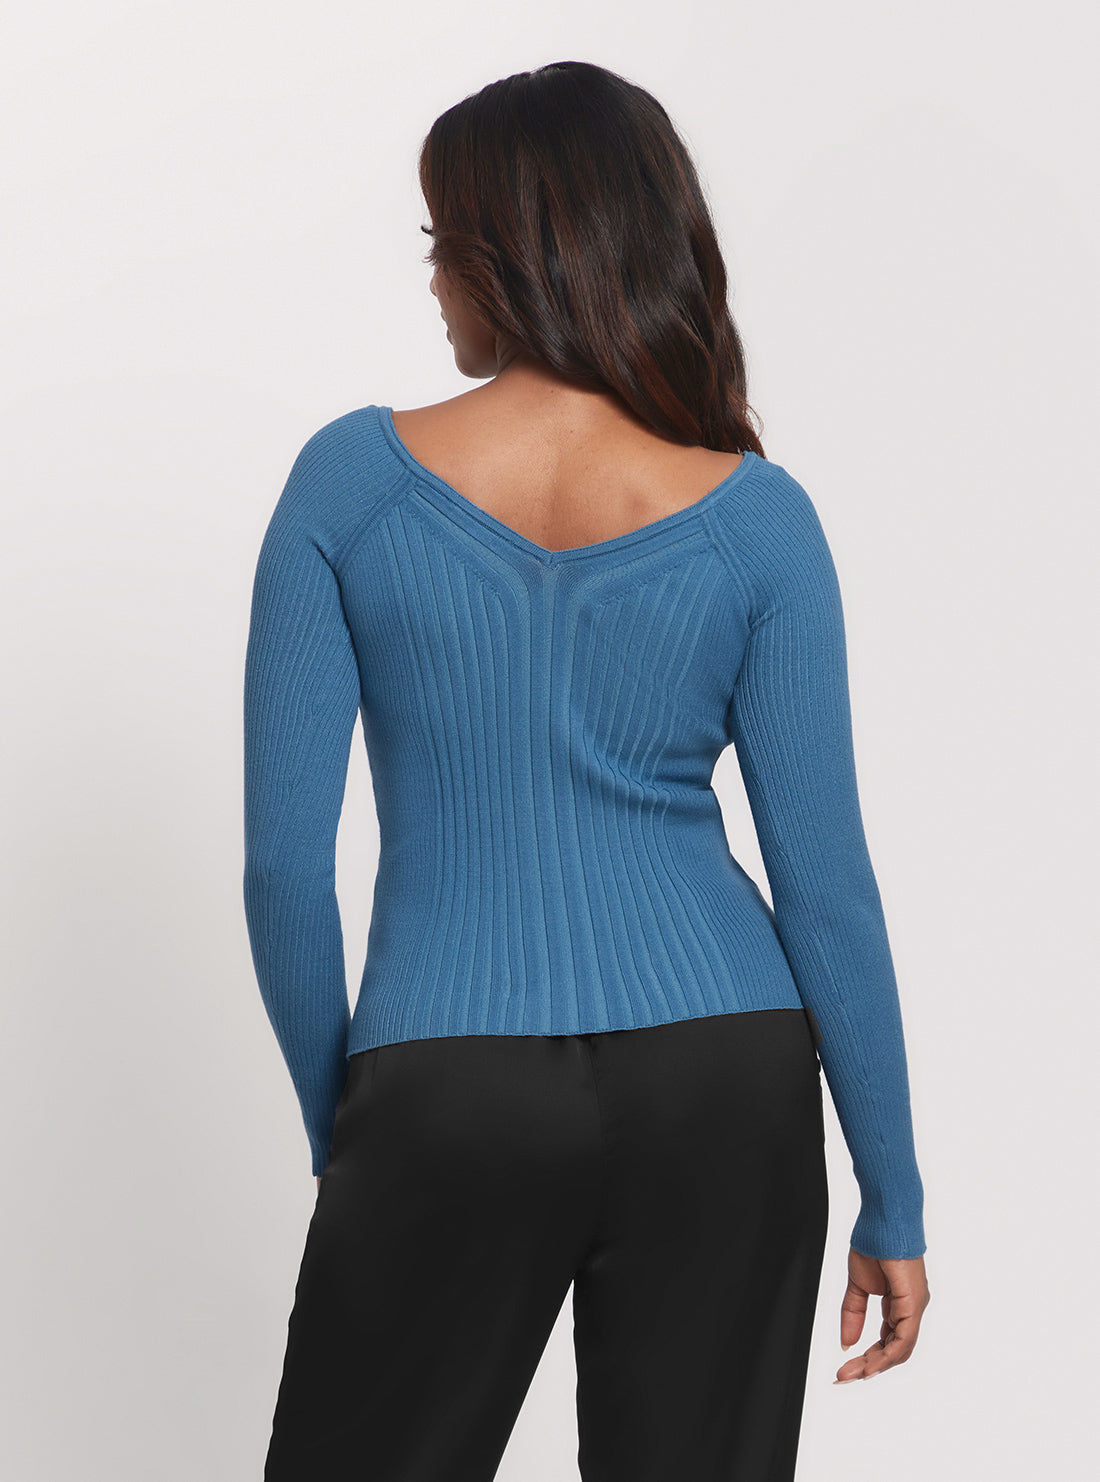 GUESS Blue Allie Long Sleeve Knit Top back view